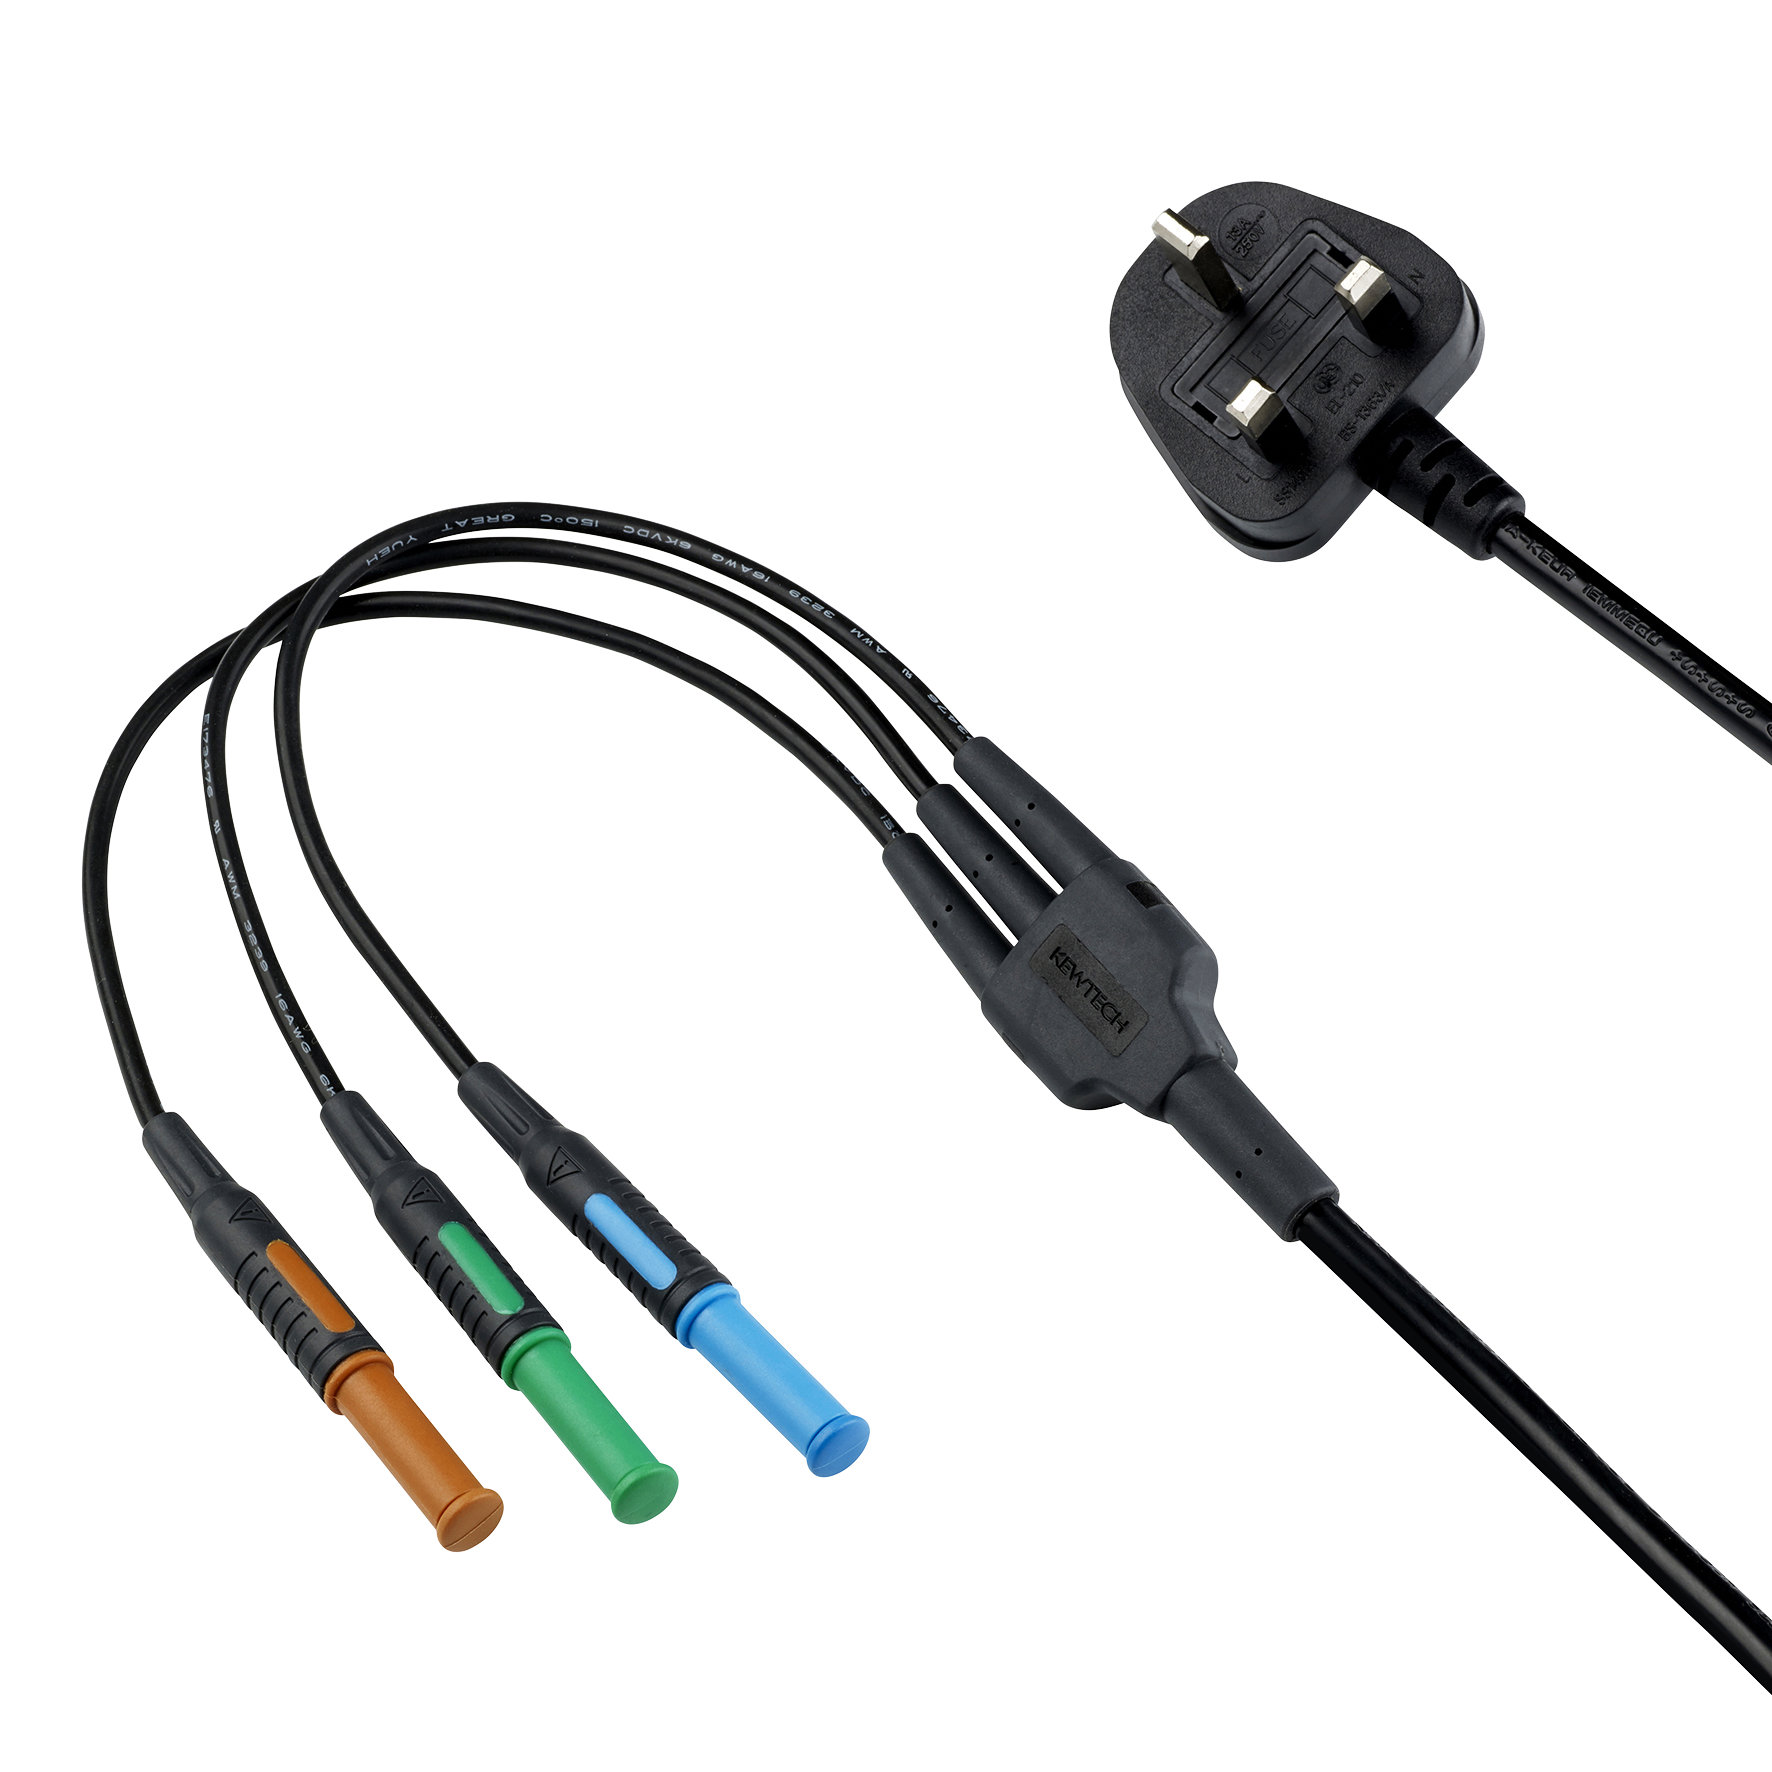 Kewtech KAMP12UK Mains Lead with 3x 4mm Connectors for KT64 & KT65 